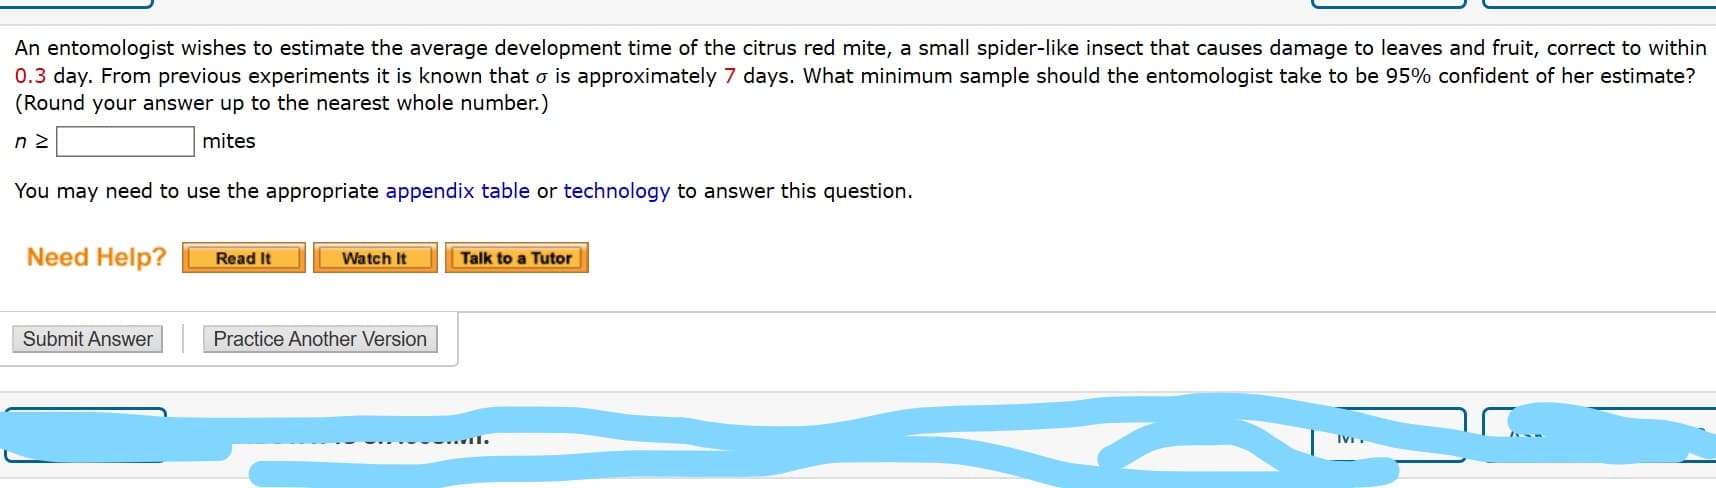 An entomologist wishes to estimate the average development time of the citrus red mite, a small spider-like insect that causes damage to leaves and fruit, correct to within
0.3 day. From previous experiments it is known that o is approximately 7 days. What minimum sample should the entomologist take to be 95% confident of her estimate?
(Round your answer up to the nearest whole number.)
mites
You may need to use the appropriate appendix table or technology to answer this question.
Need Help?
Read It
Watch It
Talk to a Tutor
Submit Answer
Practice Another Version
